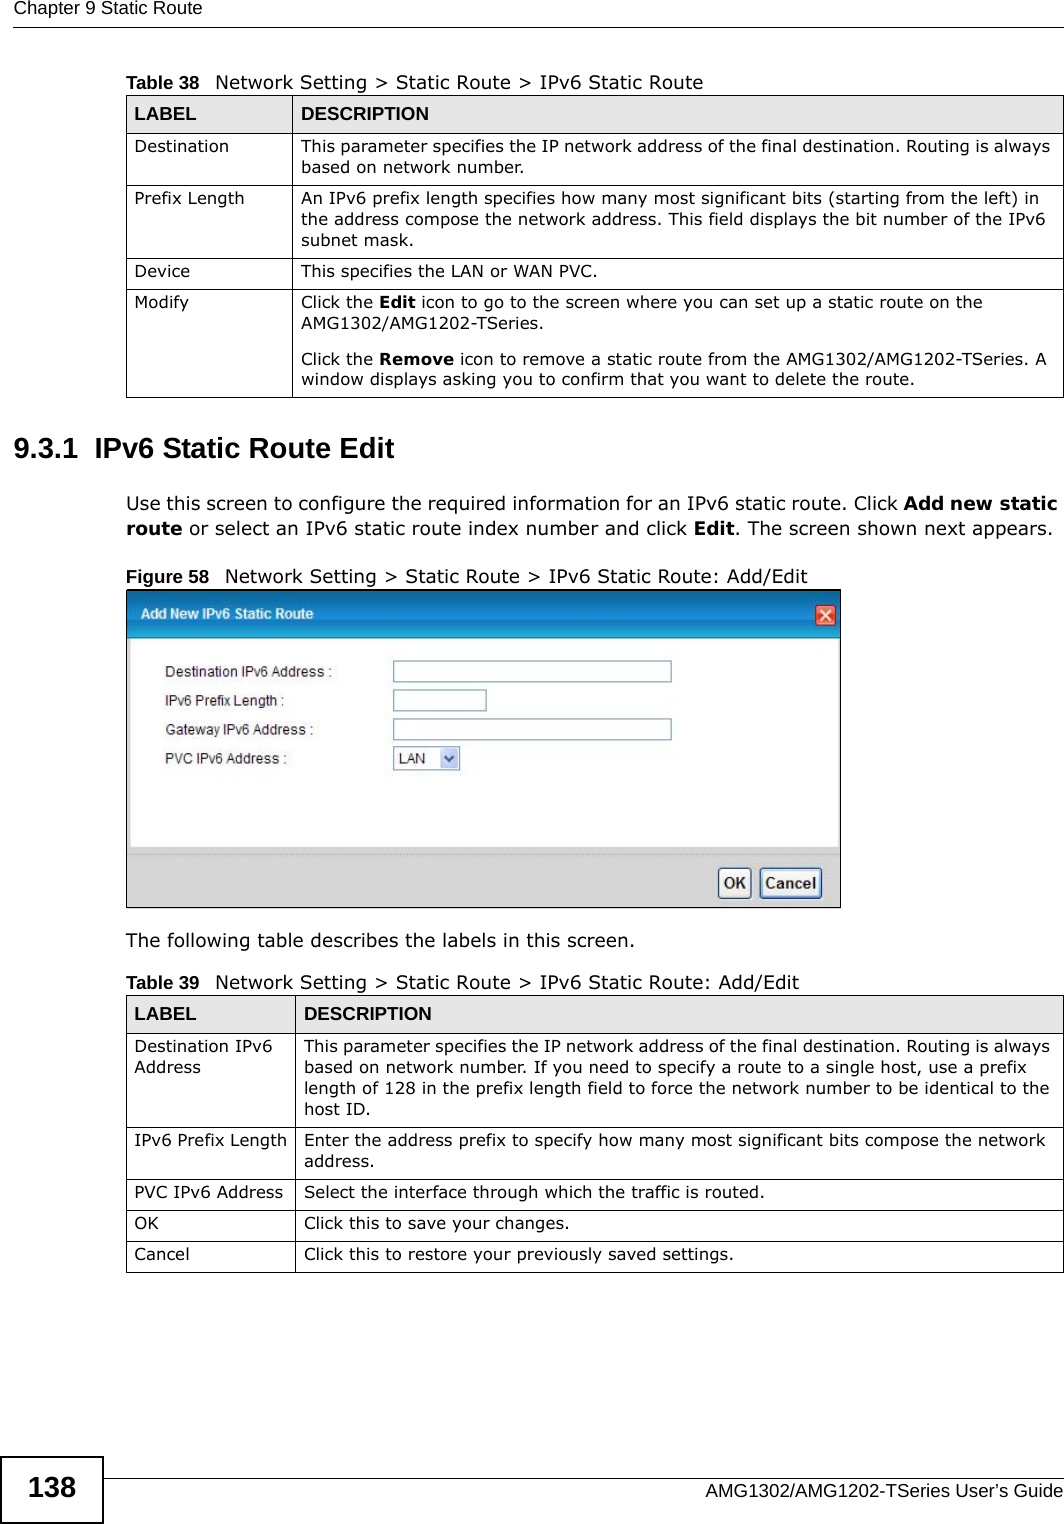 Chapter 9 Static RouteAMG1302/AMG1202-TSeries User’s Guide1389.3.1  IPv6 Static Route Edit   Use this screen to configure the required information for an IPv6 static route. Click Add new static route or select an IPv6 static route index number and click Edit. The screen shown next appears.Figure 58   Network Setting &gt; Static Route &gt; IPv6 Static Route: Add/EditThe following table describes the labels in this screen. Destination This parameter specifies the IP network address of the final destination. Routing is always based on network number. Prefix Length An IPv6 prefix length specifies how many most significant bits (starting from the left) in the address compose the network address. This field displays the bit number of the IPv6 subnet mask.Device This specifies the LAN or WAN PVC.Modify Click the Edit icon to go to the screen where you can set up a static route on the AMG1302/AMG1202-TSeries.Click the Remove icon to remove a static route from the AMG1302/AMG1202-TSeries. A window displays asking you to confirm that you want to delete the route. Table 38   Network Setting &gt; Static Route &gt; IPv6 Static RouteLABEL DESCRIPTIONTable 39   Network Setting &gt; Static Route &gt; IPv6 Static Route: Add/EditLABEL DESCRIPTIONDestination IPv6 AddressThis parameter specifies the IP network address of the final destination. Routing is always based on network number. If you need to specify a route to a single host, use a prefix length of 128 in the prefix length field to force the network number to be identical to the host ID.IPv6 Prefix Length Enter the address prefix to specify how many most significant bits compose the network address.PVC IPv6 Address Select the interface through which the traffic is routed.OK Click this to save your changes.Cancel Click this to restore your previously saved settings.